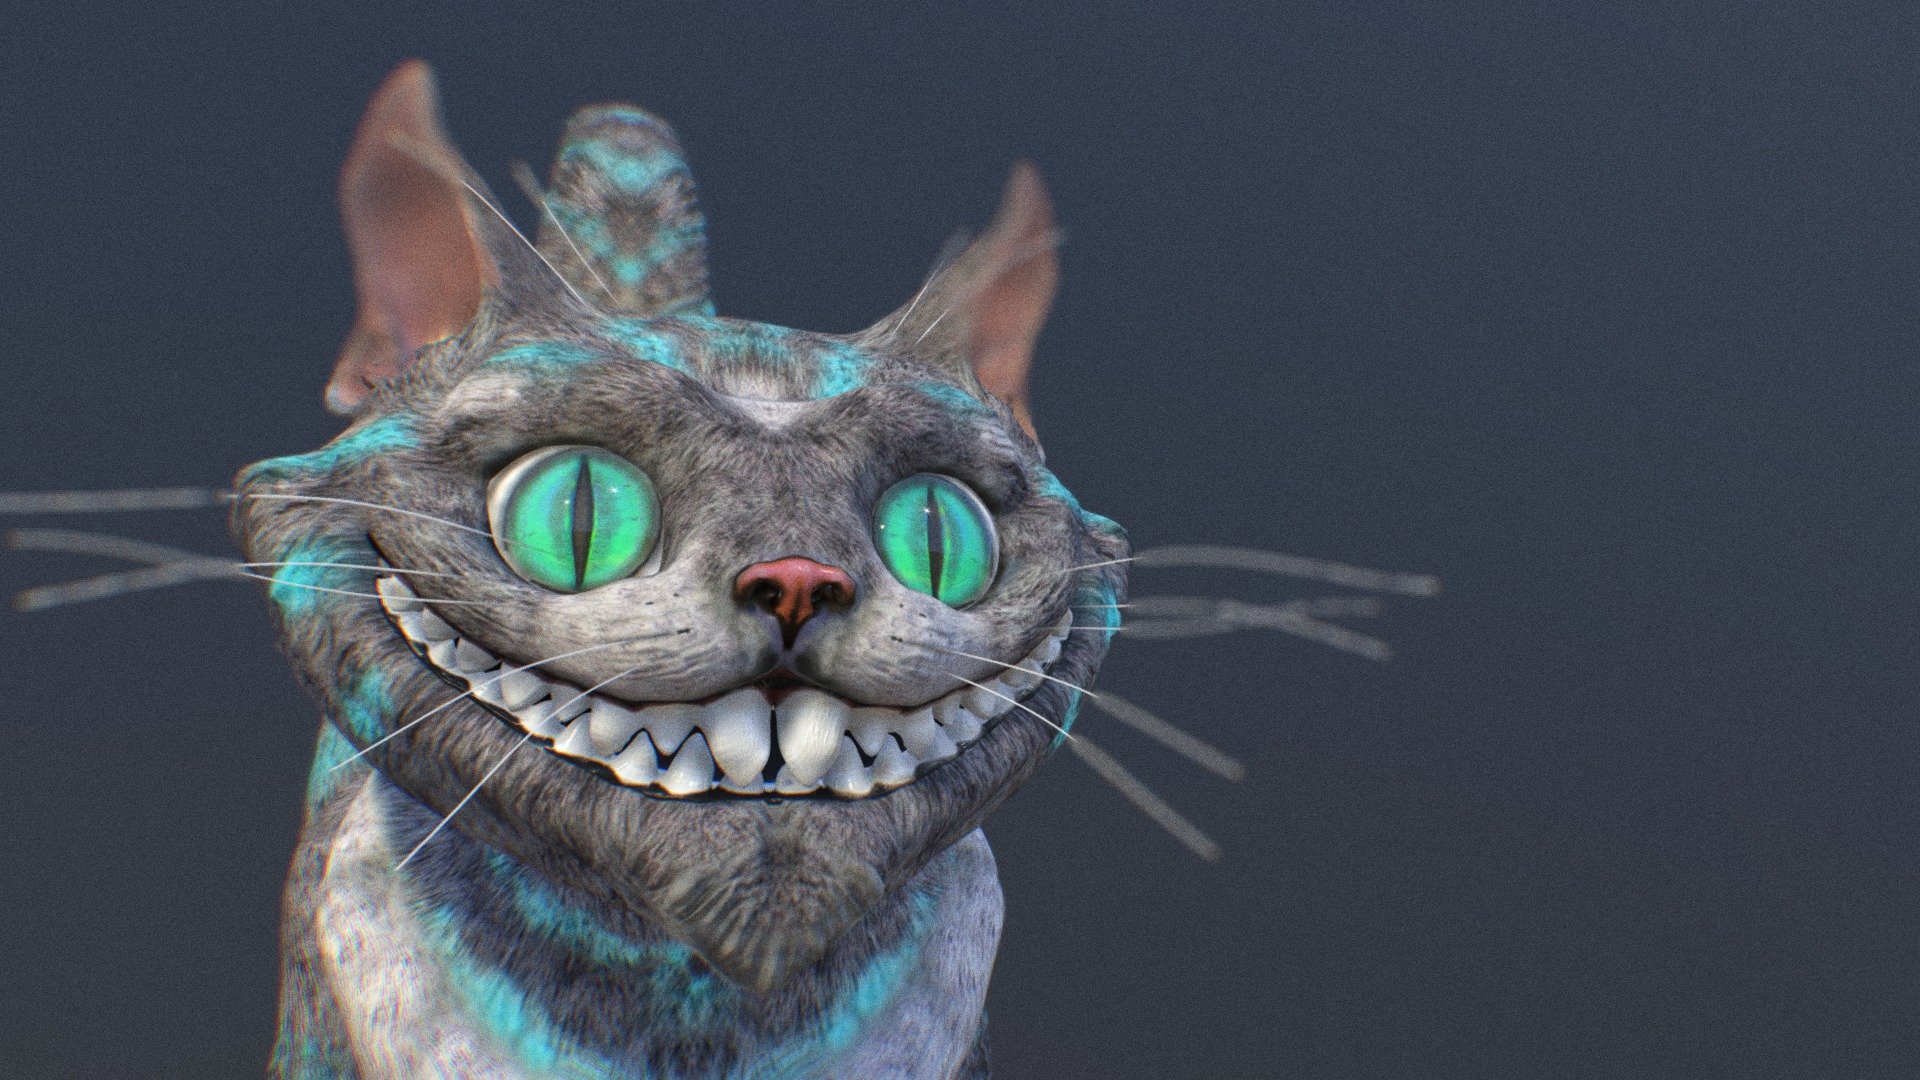 Cheshire Cat V01 - My Zbrush model
Additional files included:
1. Optimized 3ds max scene
2. Zbrush high-poly (17mln points) model (5 subtools)
3. Textures - Cheshire Cat V01 - My Zbrush model - Buy Royalty Free 3D model by VRA (@architect47) 3d model